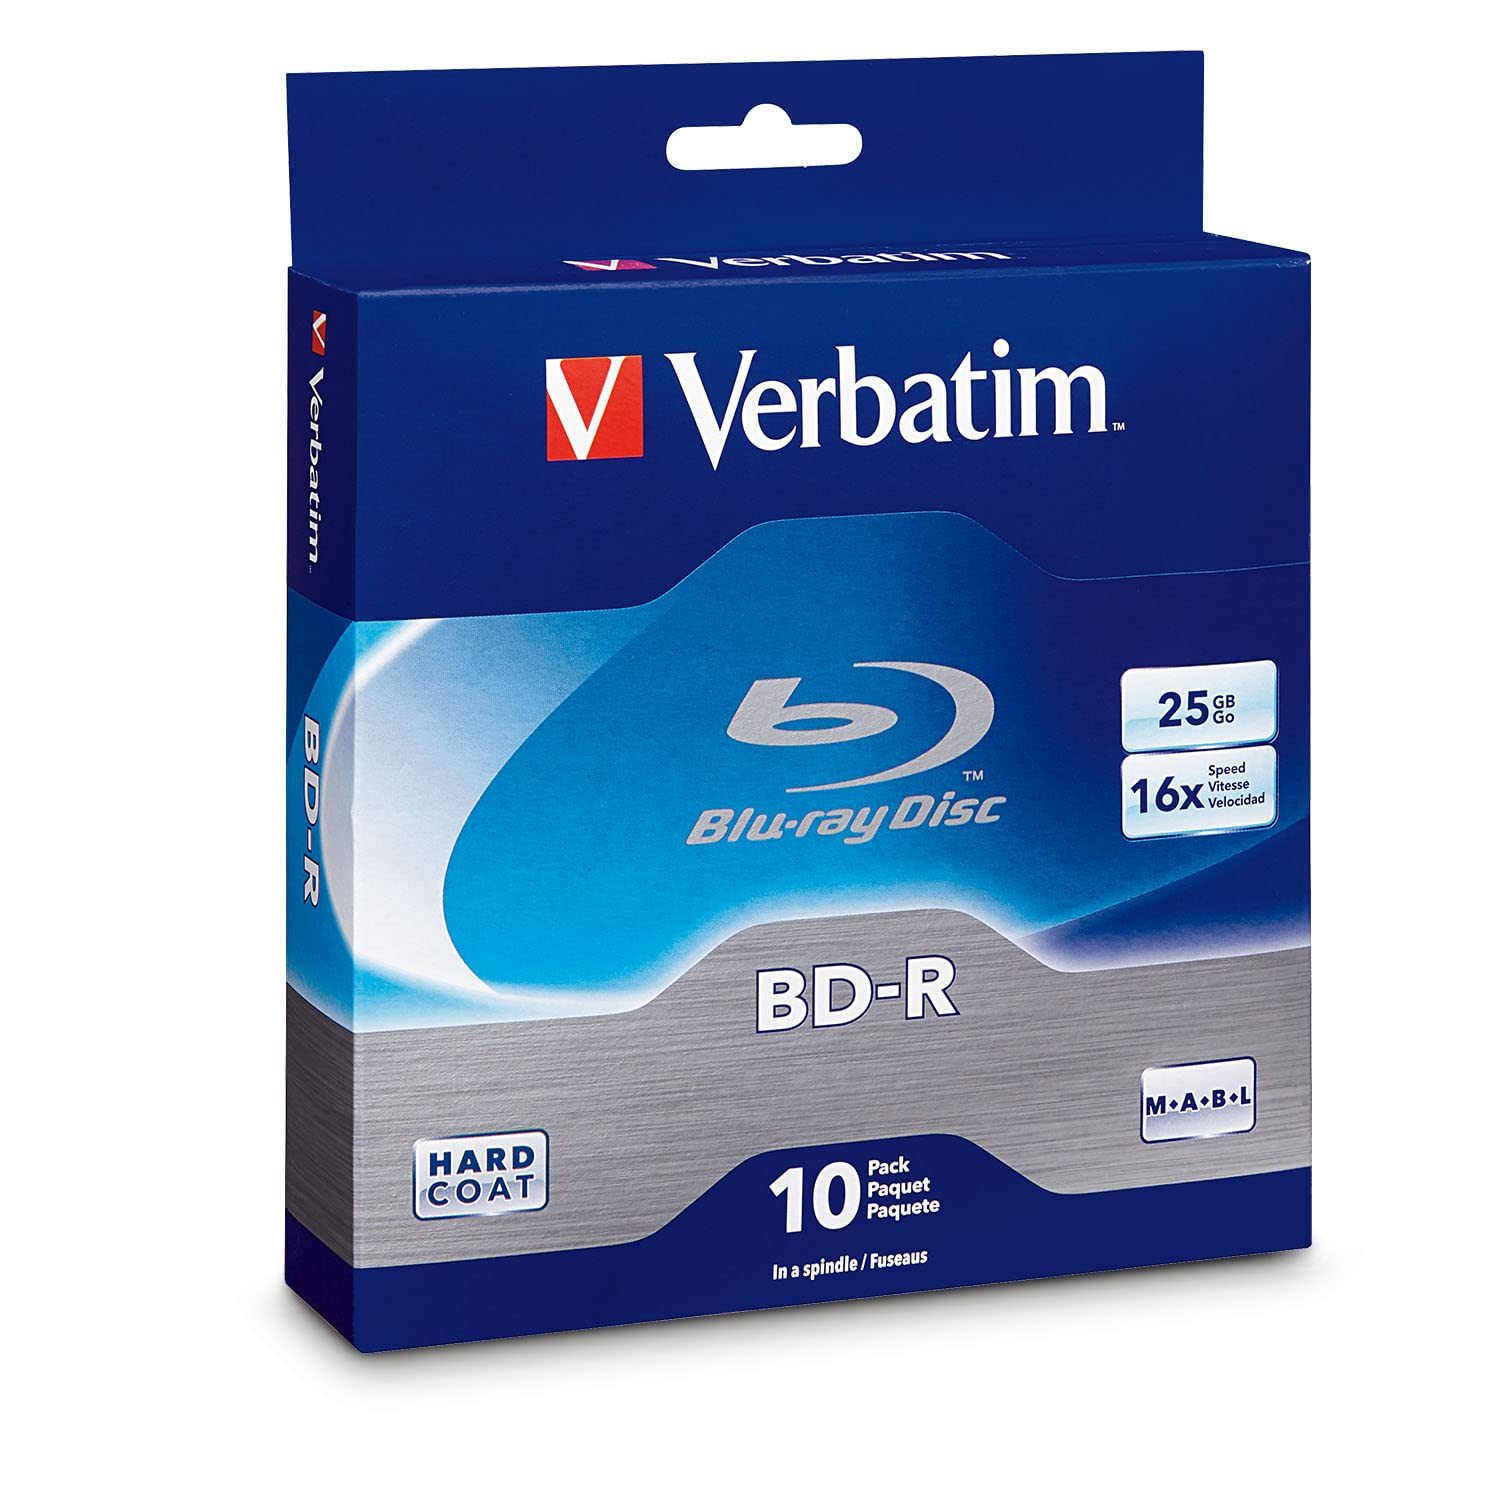 Primary image for Verbatim BD-R 25GB 16X Blu-ray Recordable Media Disc - Spindle - 97238, Branded,